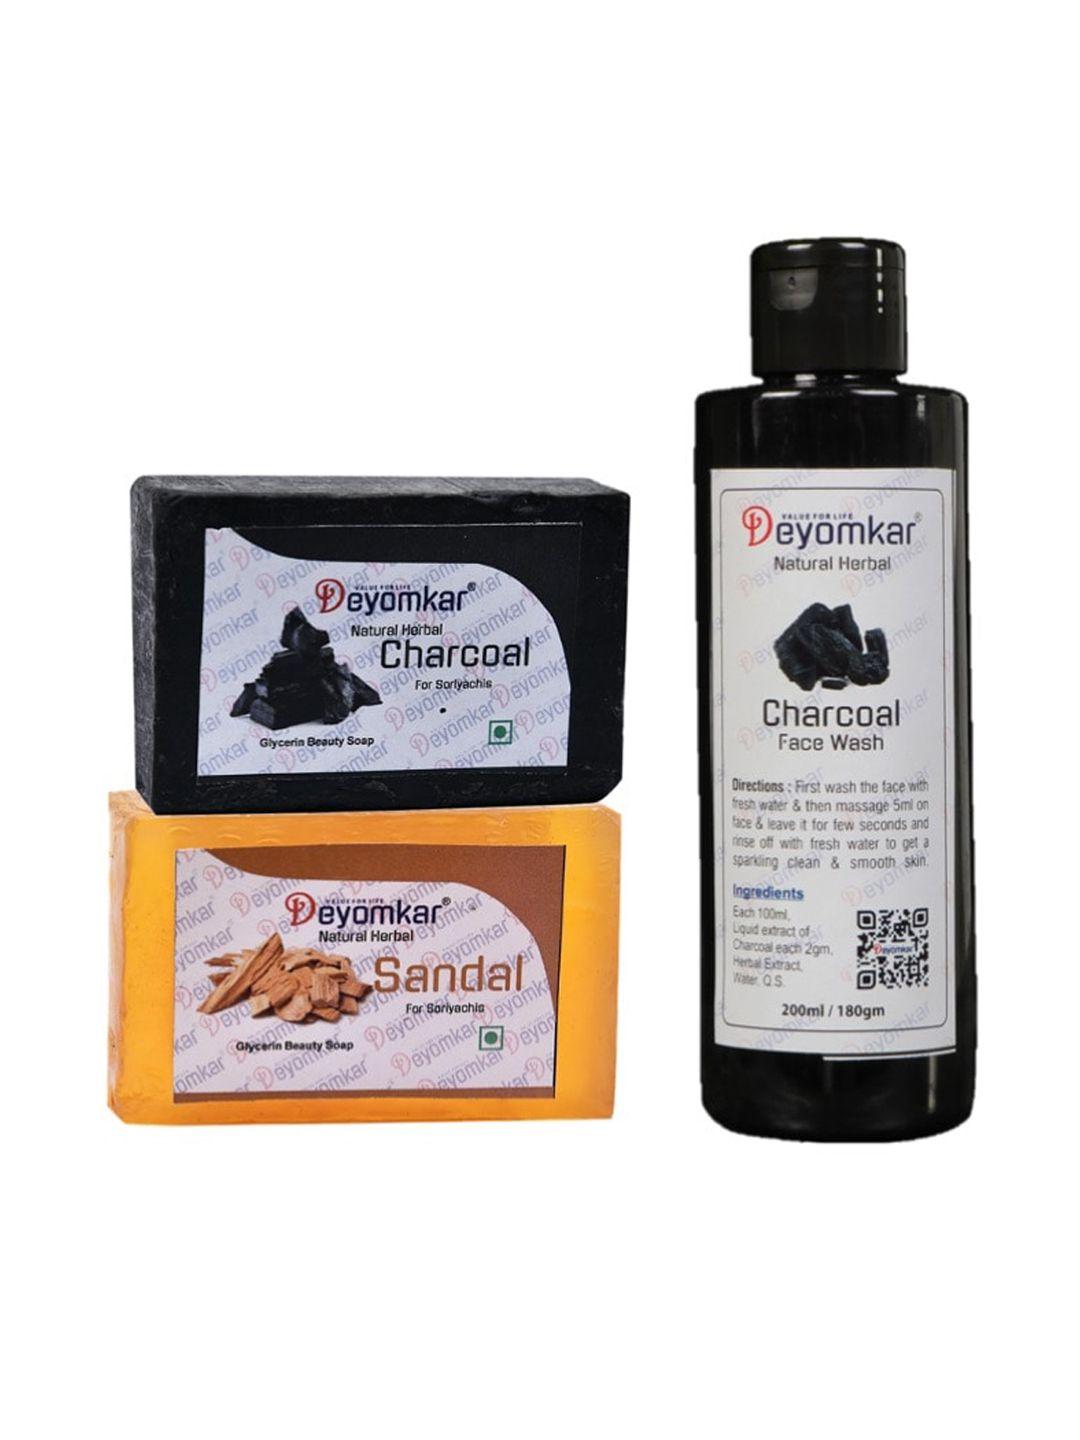 deyomkar herbal charcoal face wash with sandalwood soap and charcoal soap combo